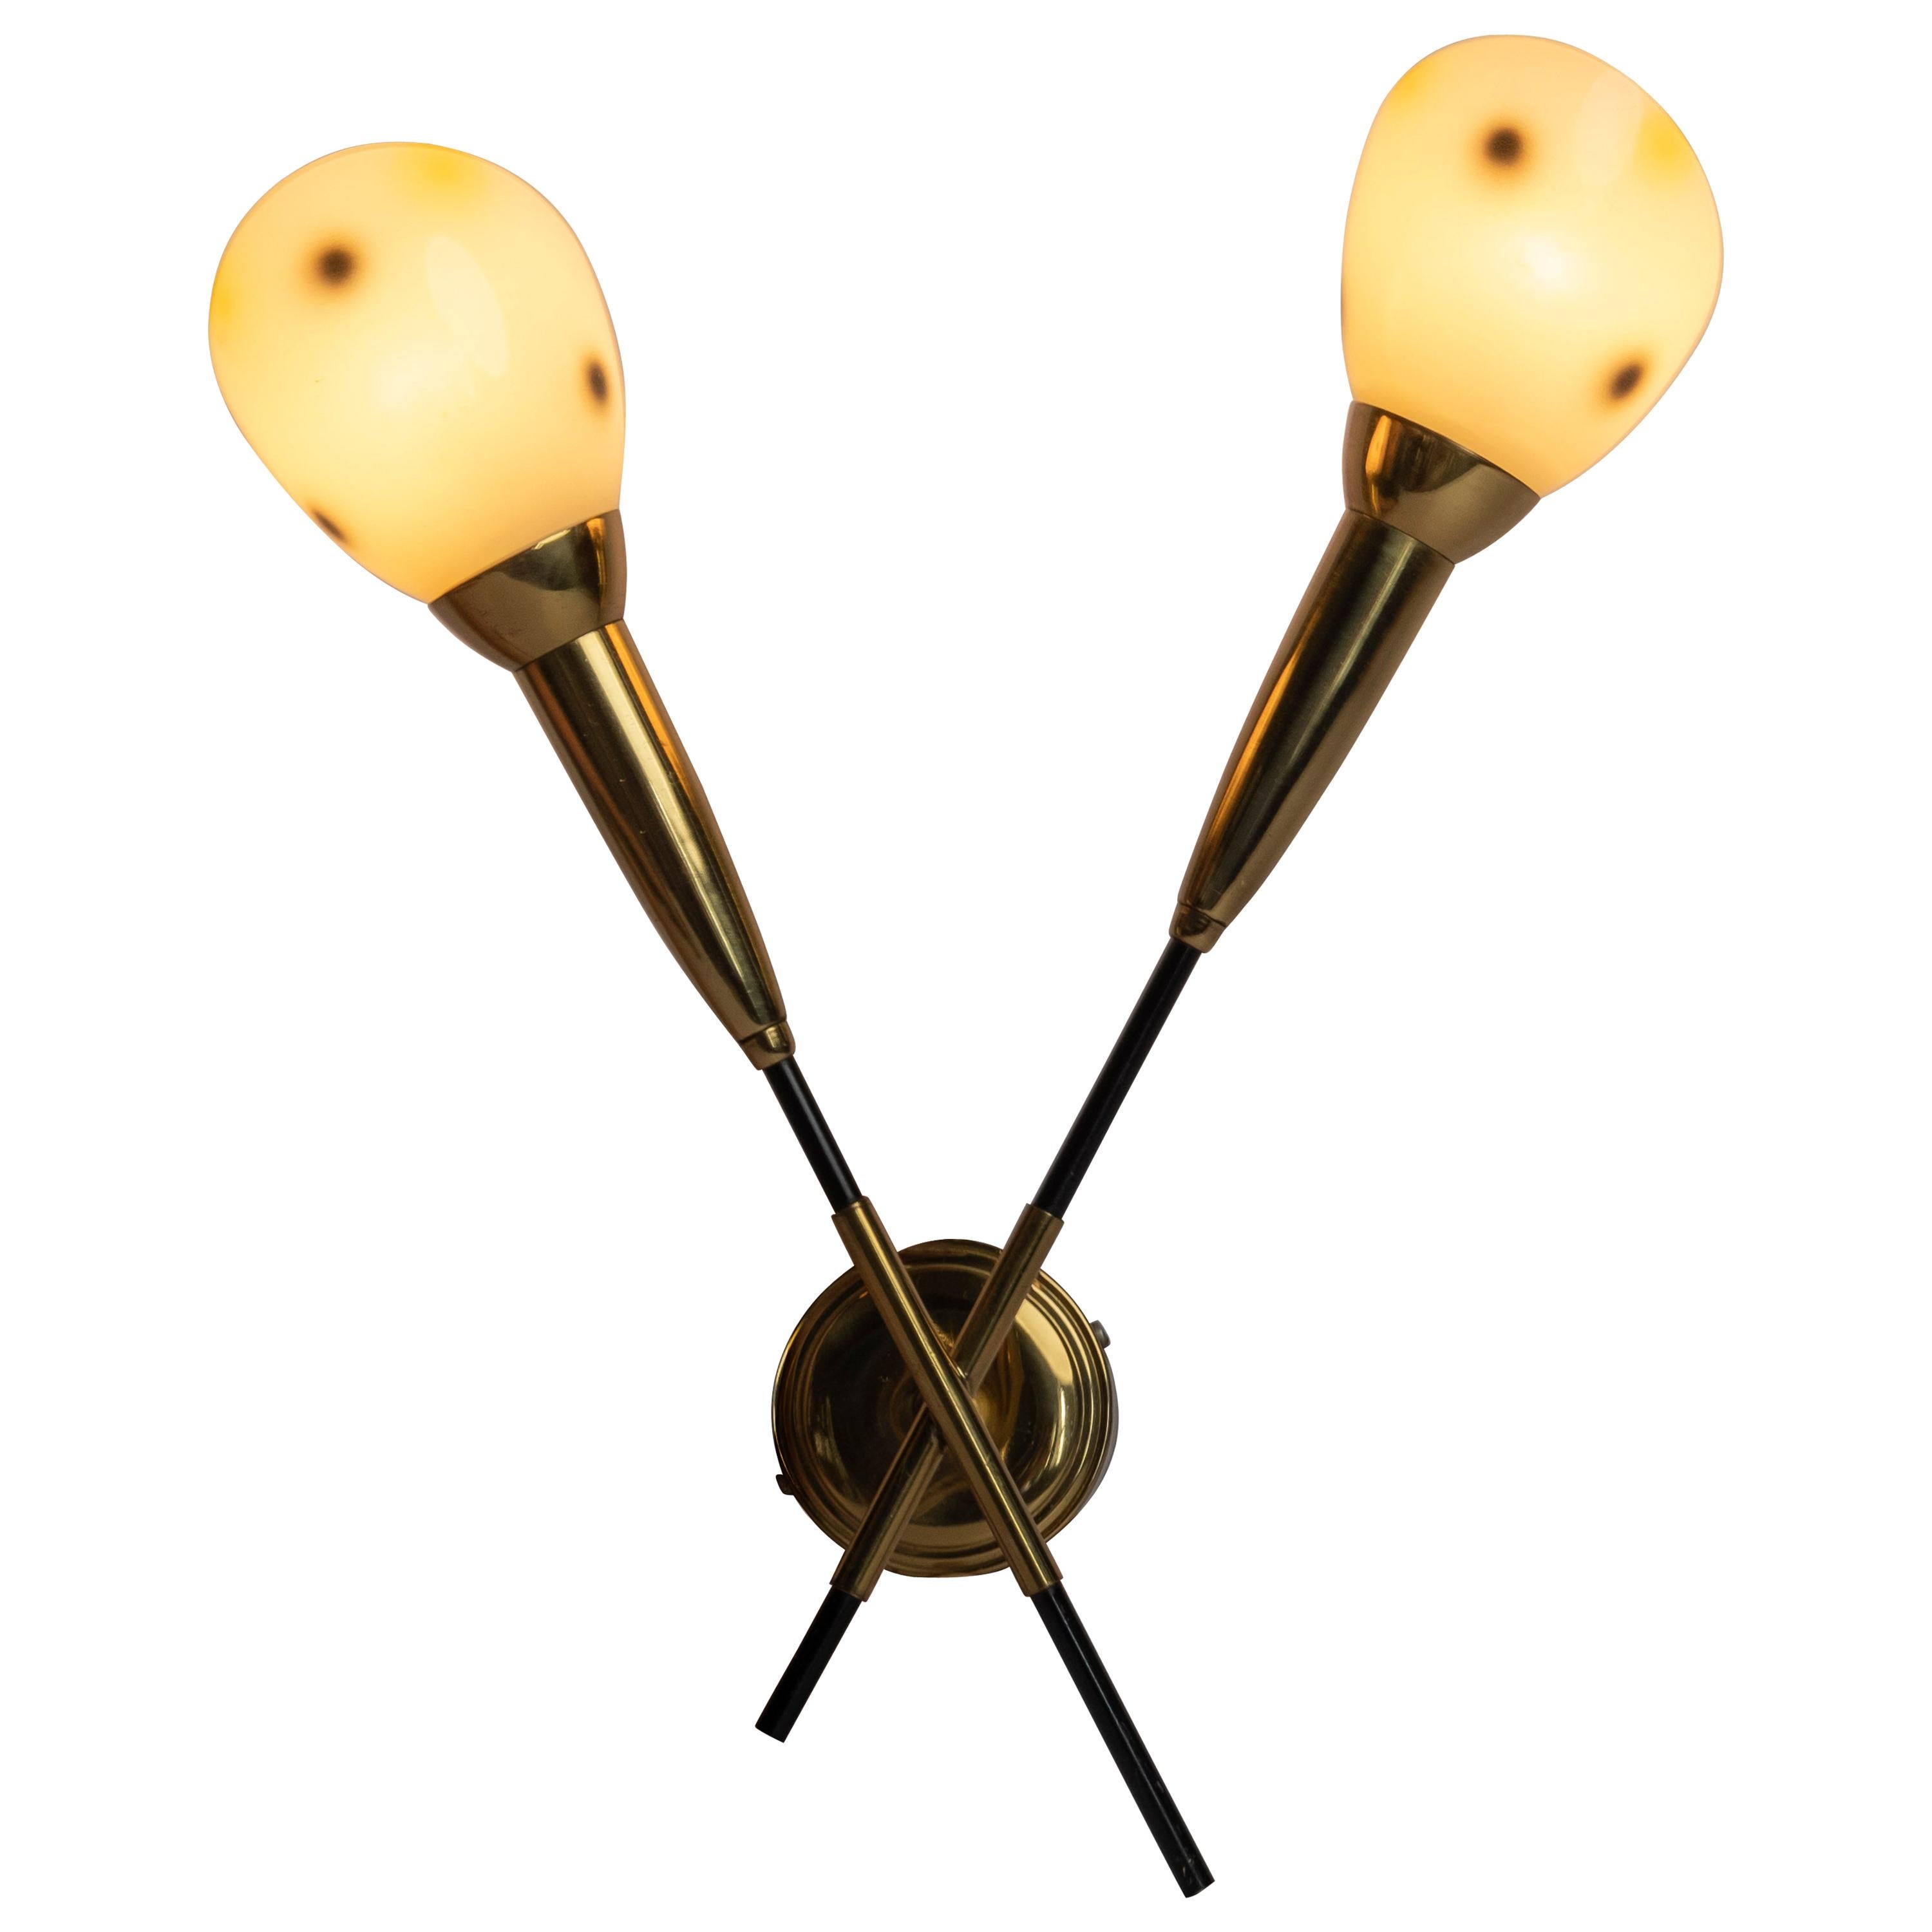 Midcentury Brass Double Headed Wall Lamp with Opaline Glass Shades, 1950s